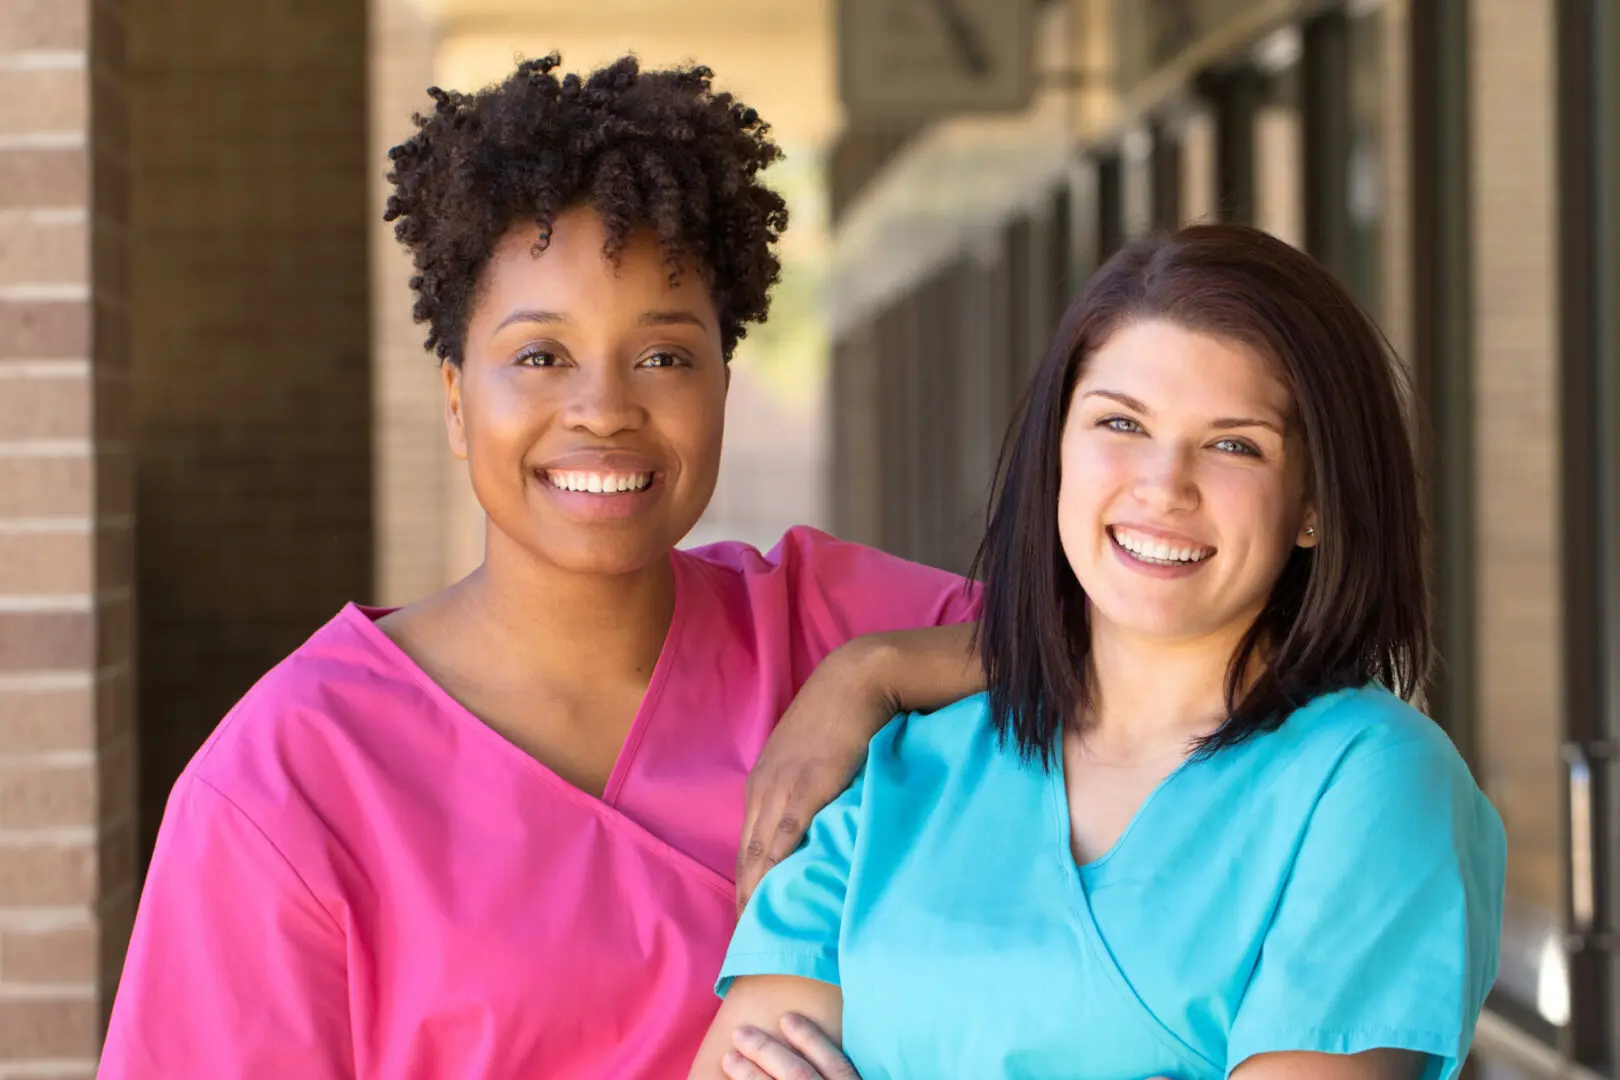 Two women in scrubs smiling for a picture.